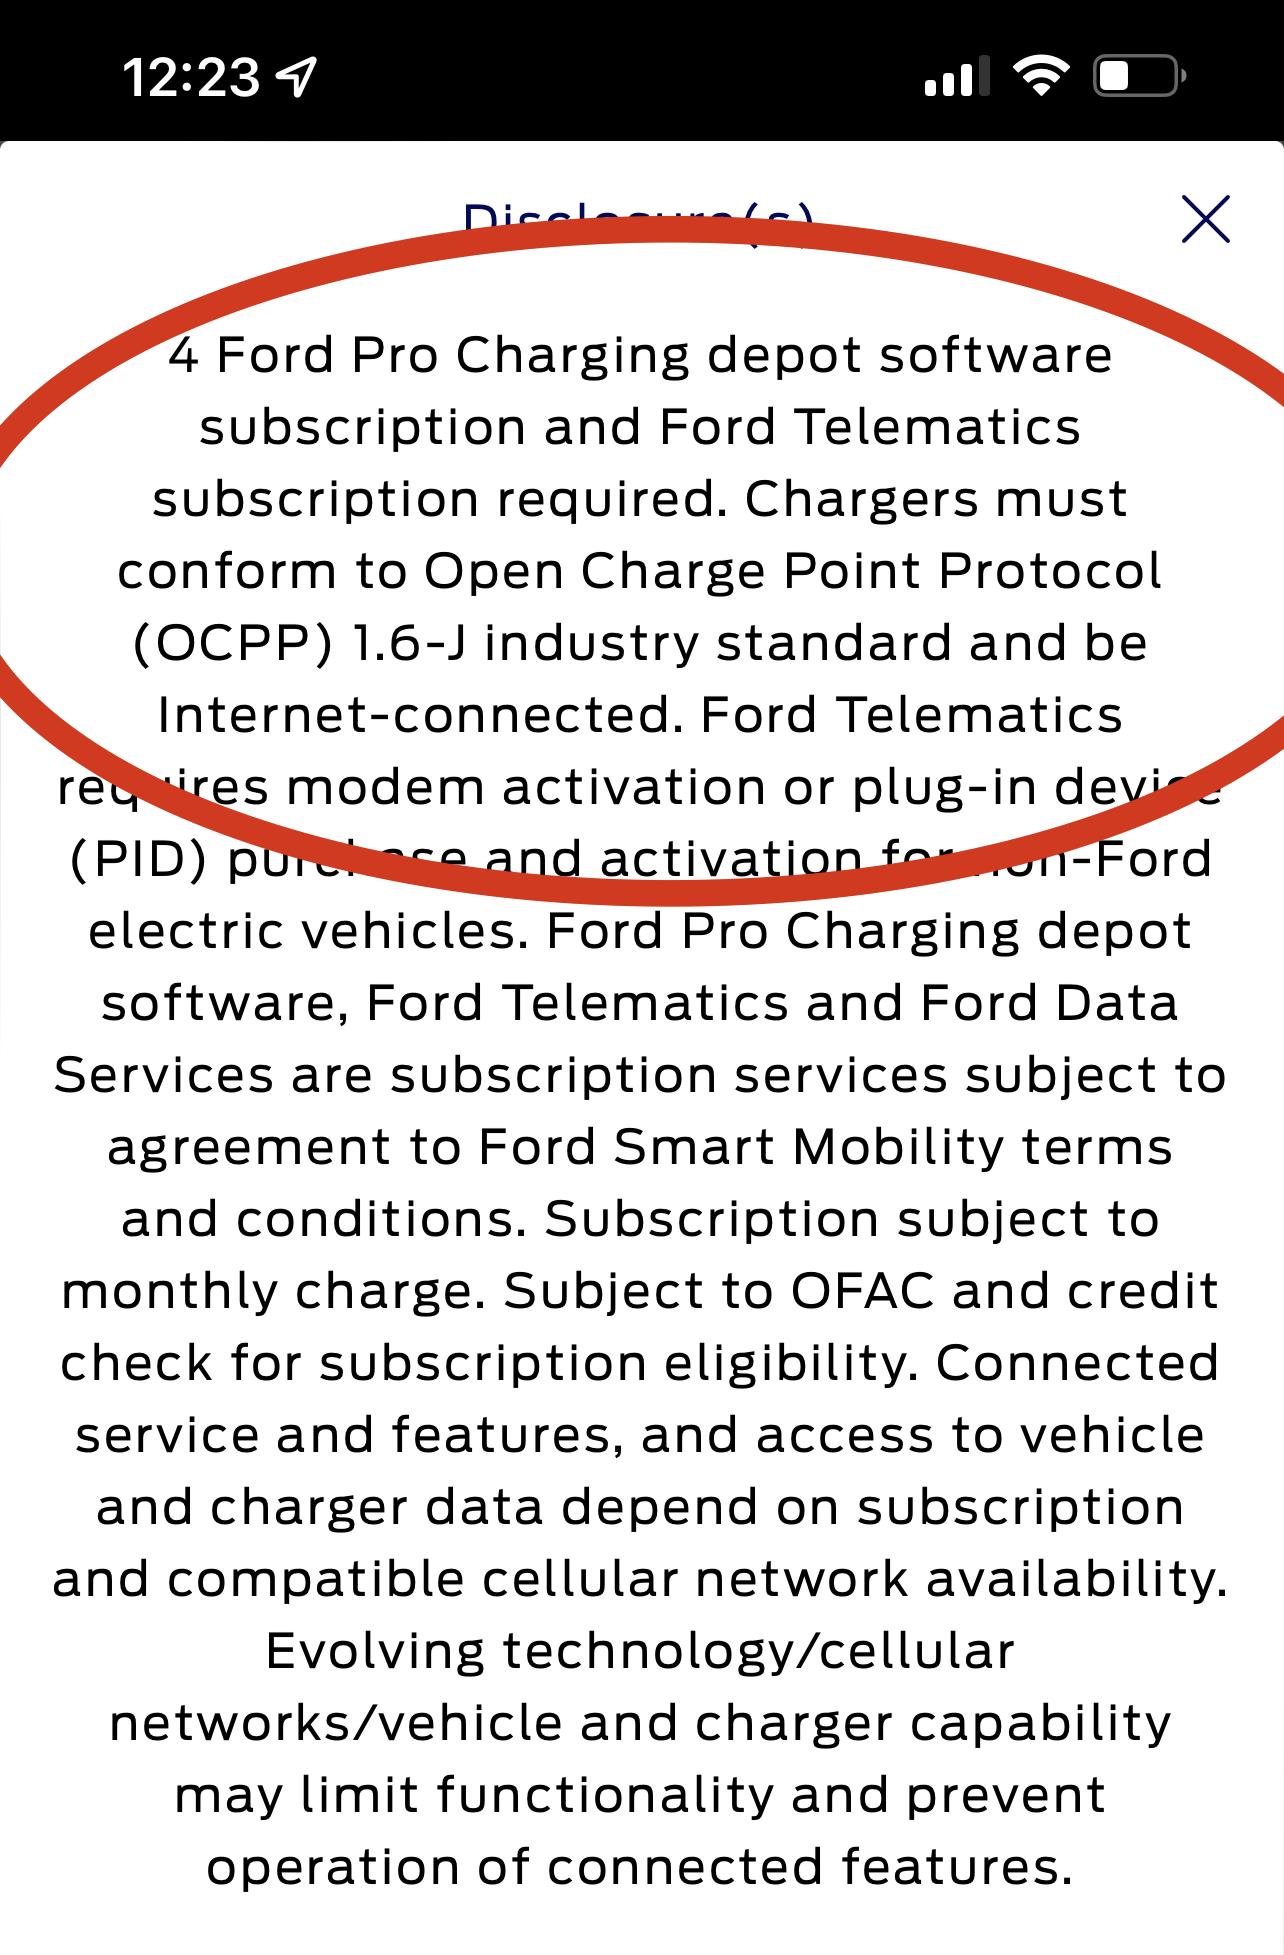 Ford F-150 Lightning OCPP: is Ford Charge Station Pro OCPP capable/compliant? 8779CBF6-72B4-44D1-AC5F-1588ACDDF100